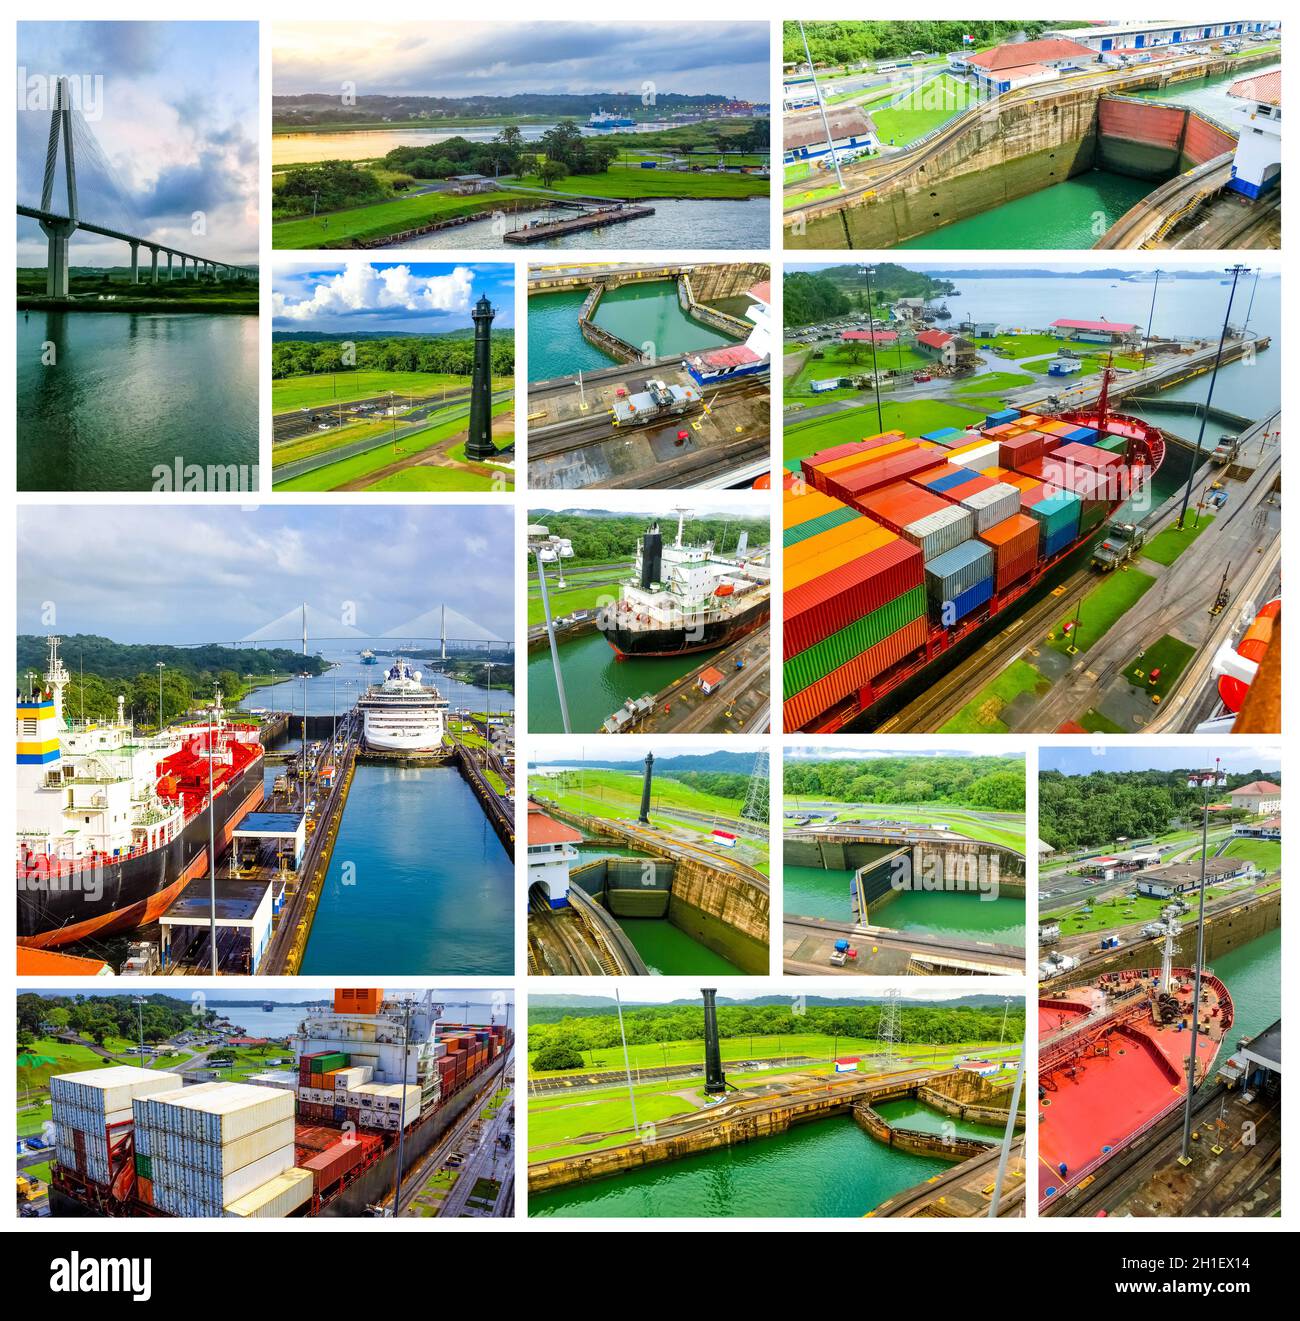 View of Panama Canal from cruise ship at Panama. Collage Stock Photo